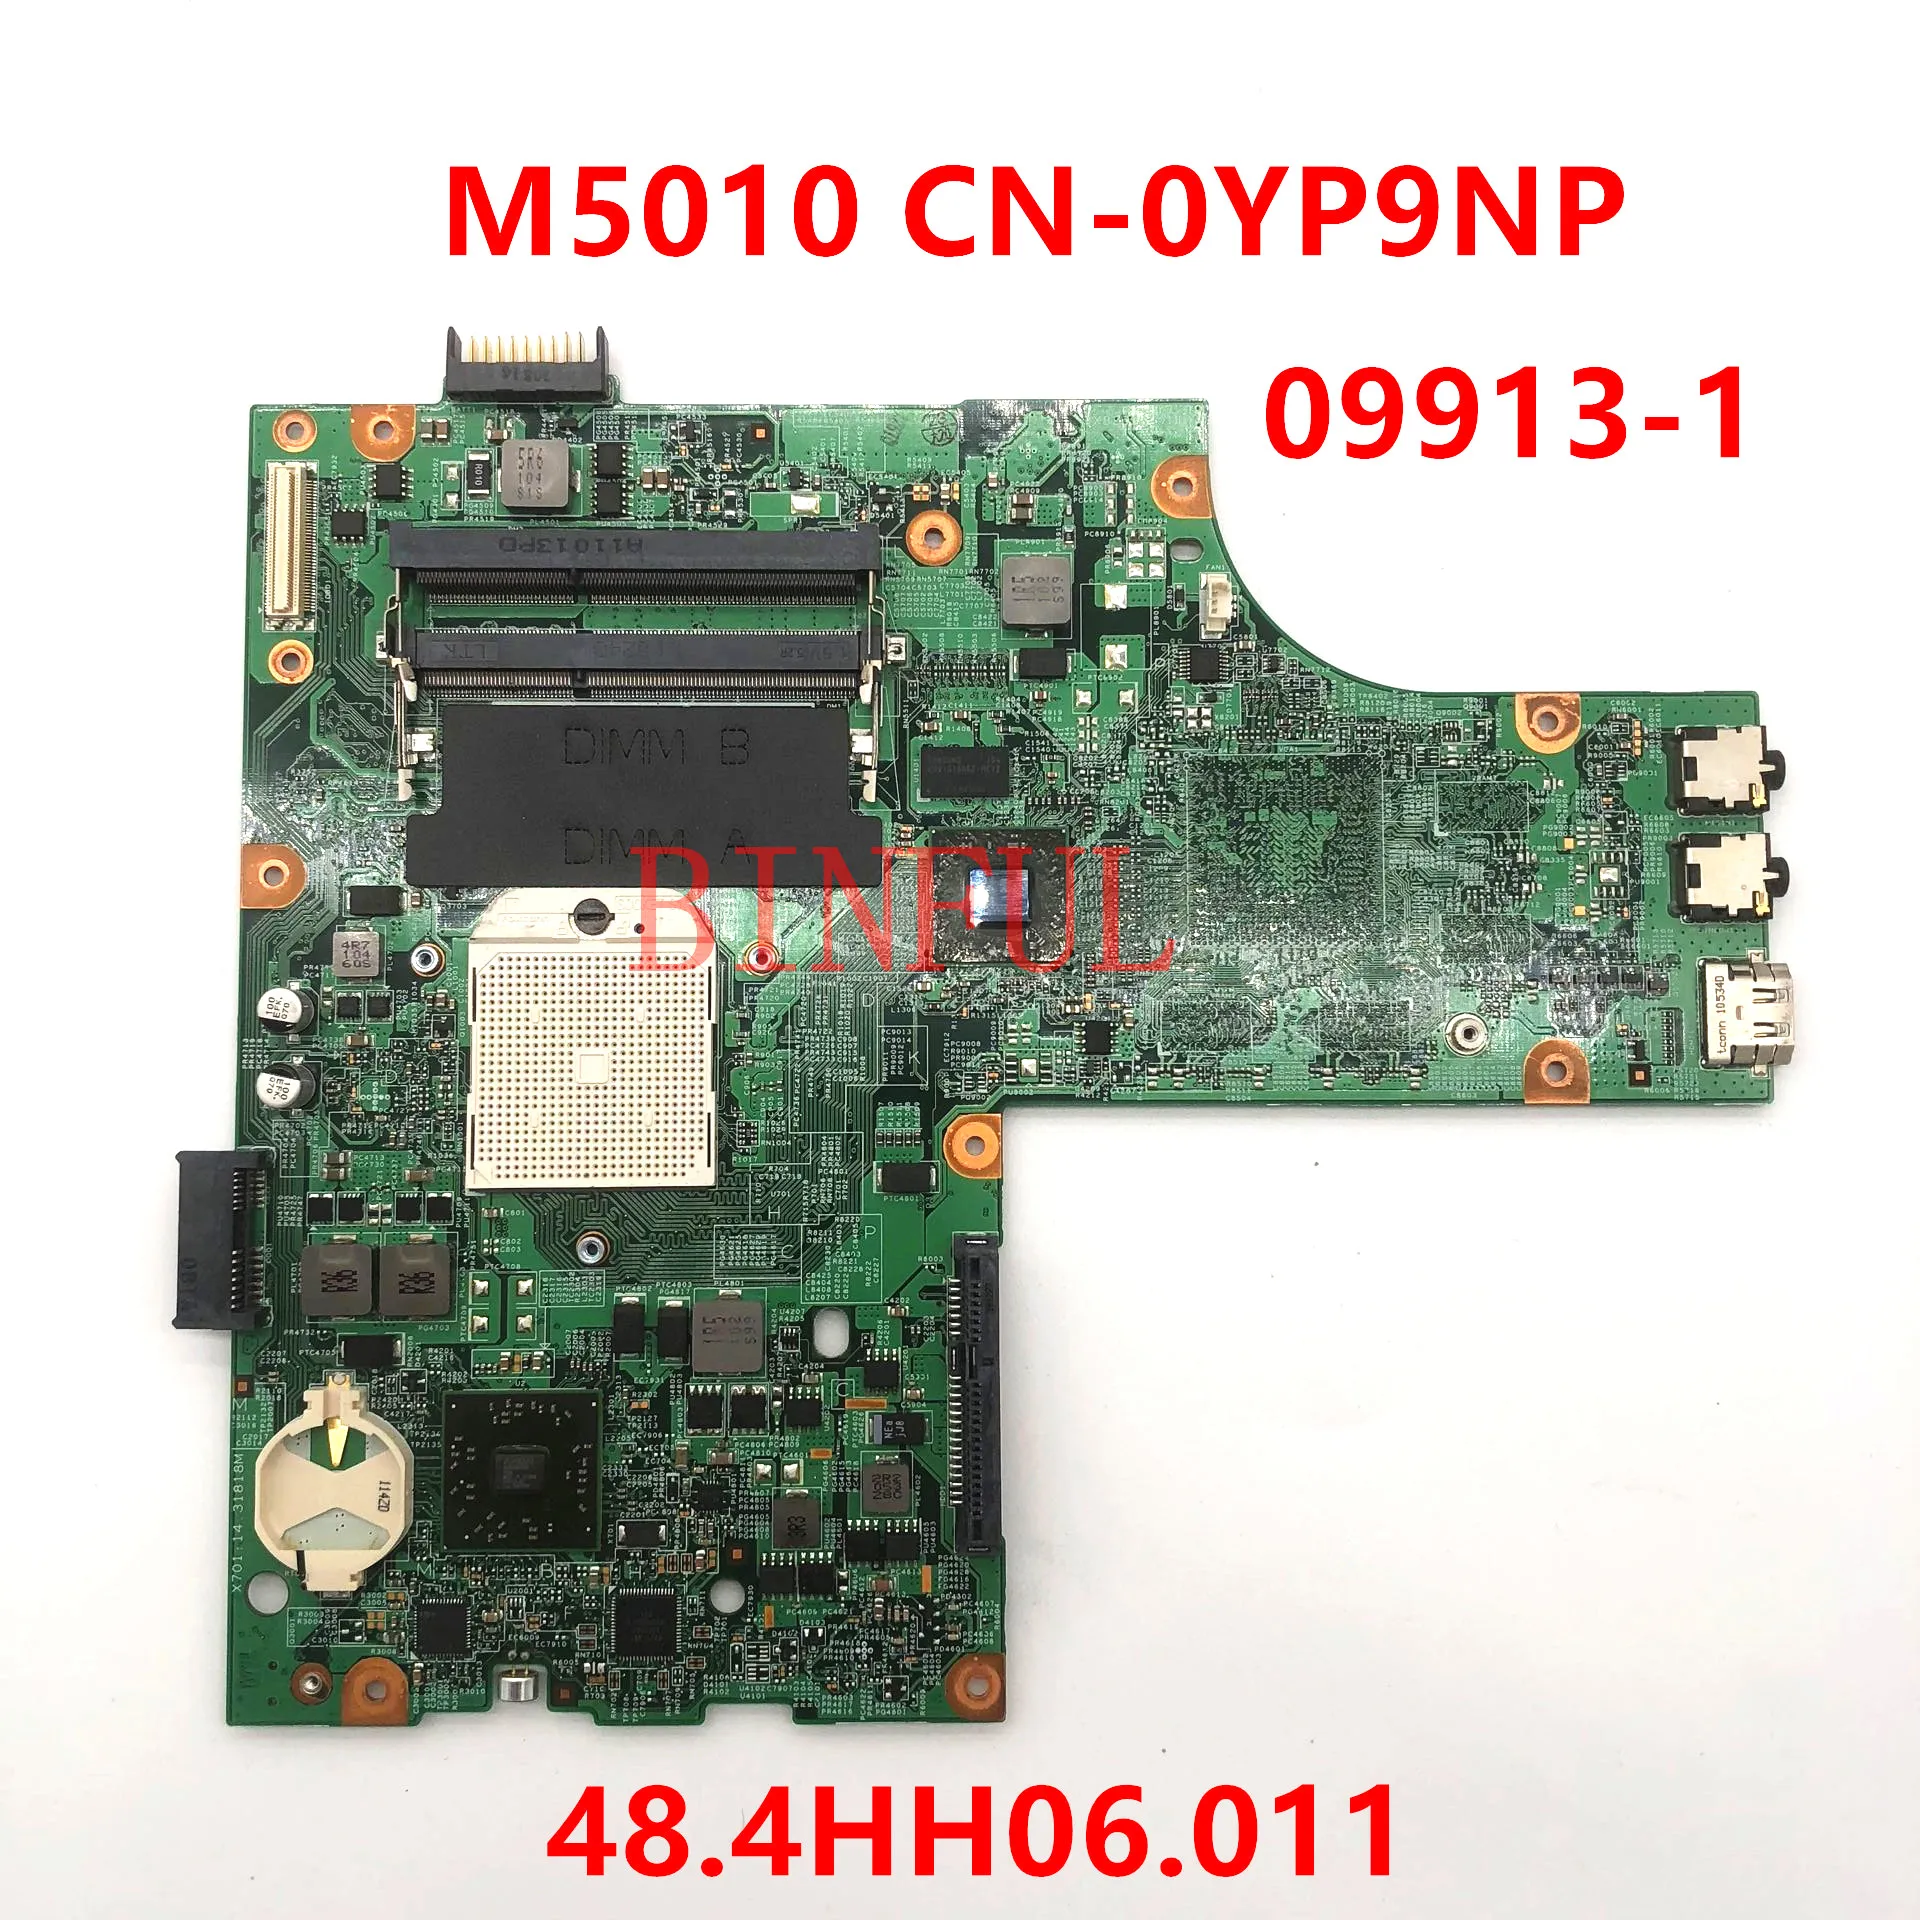 High Quality Mainboard For DELL 15R M5010 Laptop Motherboard CN-0YP9NP YP9NP 0YP9NP 09913-1 48.4HH06.011 DDR3 100% Working Well